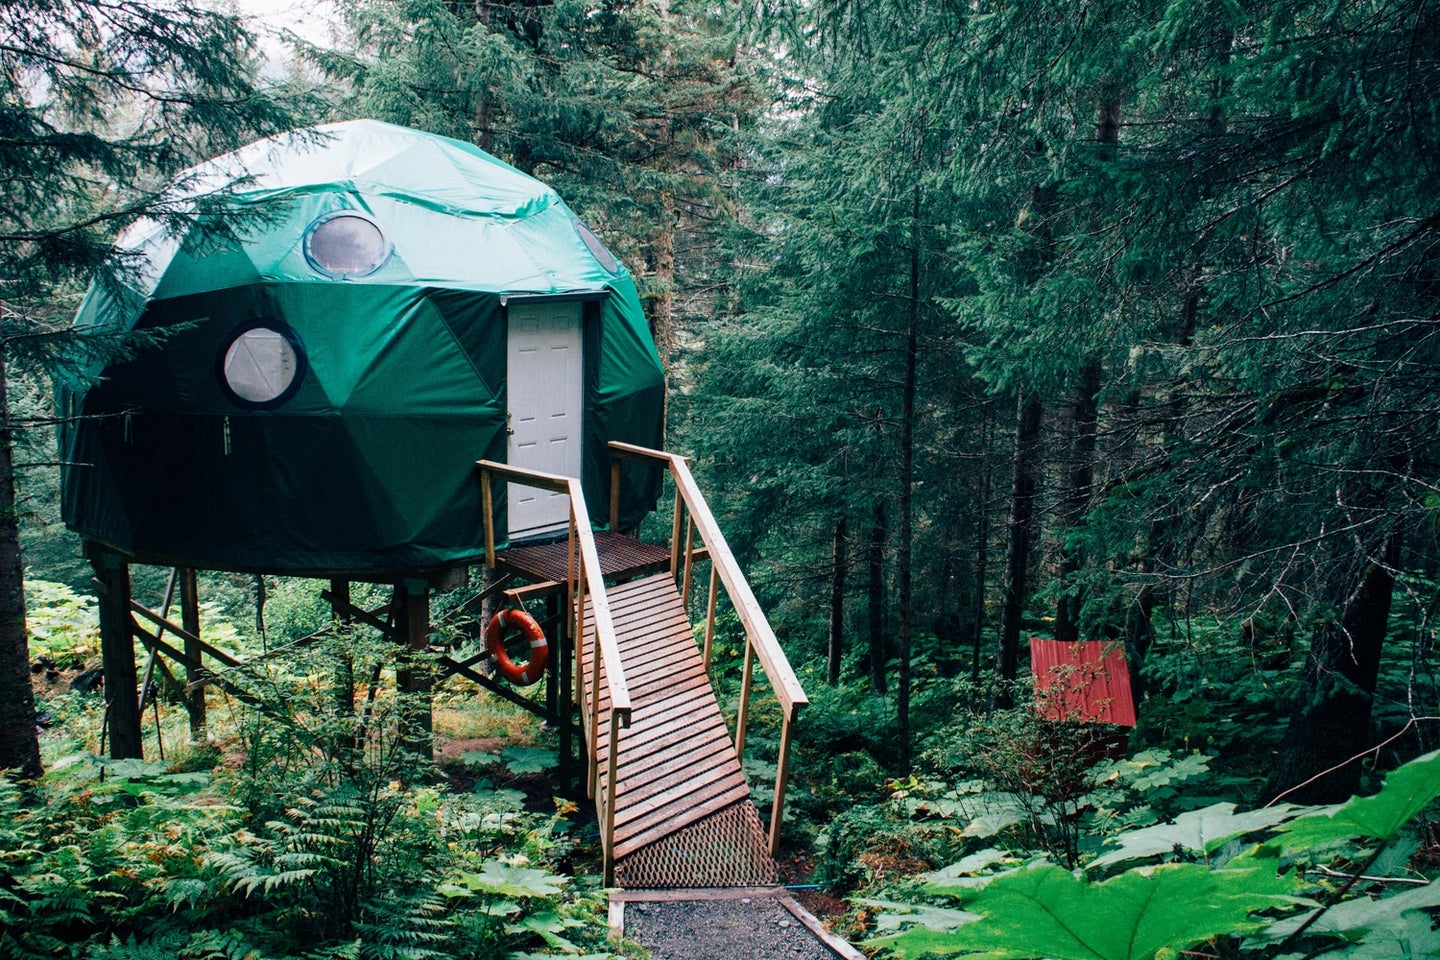 A green plastic dome treehouse in a forest.